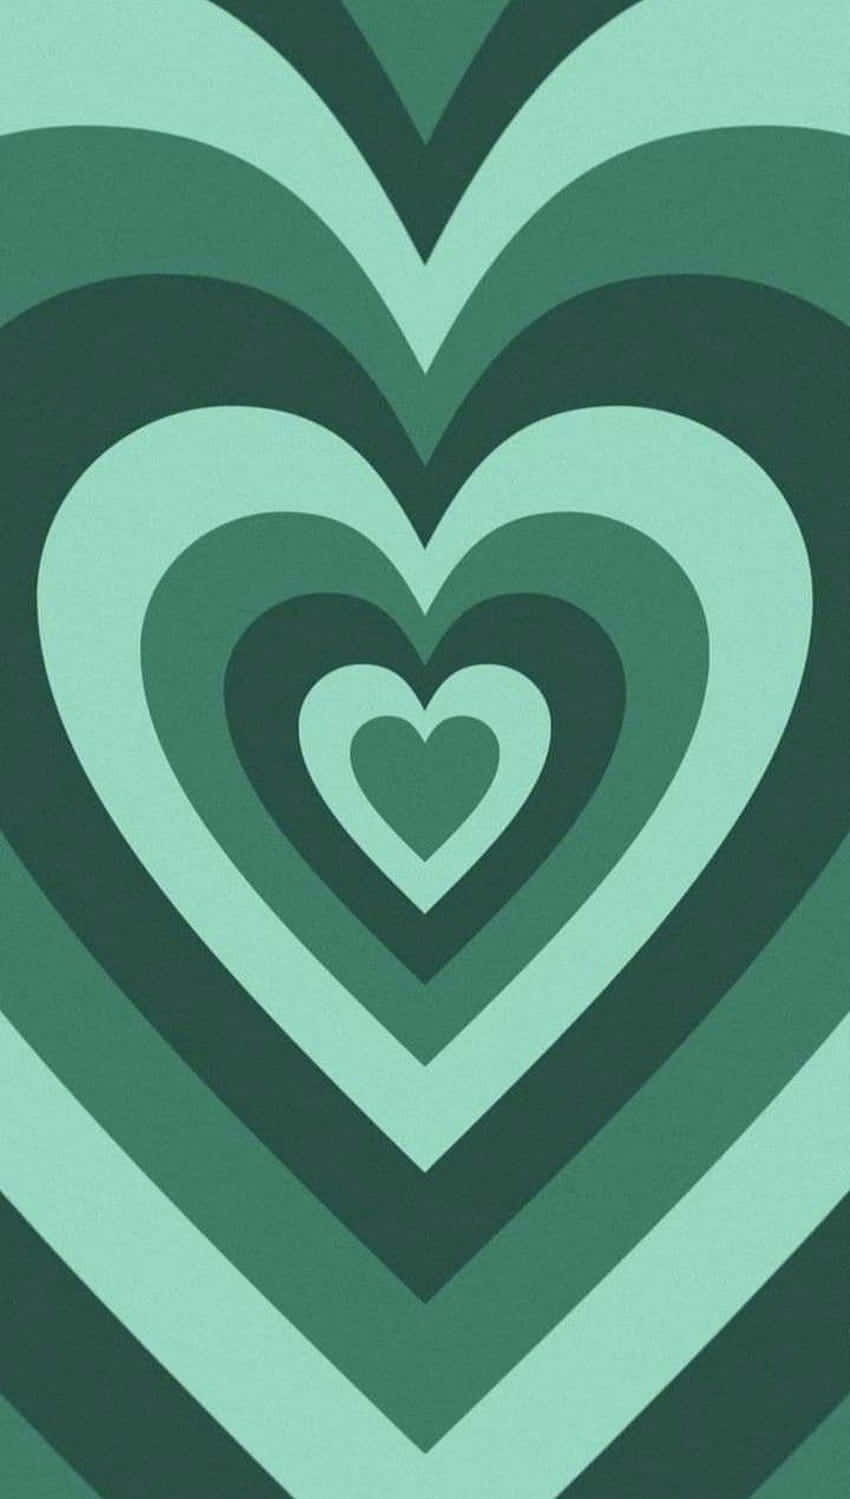 Show your love with these romantic mint green hearts Wallpaper